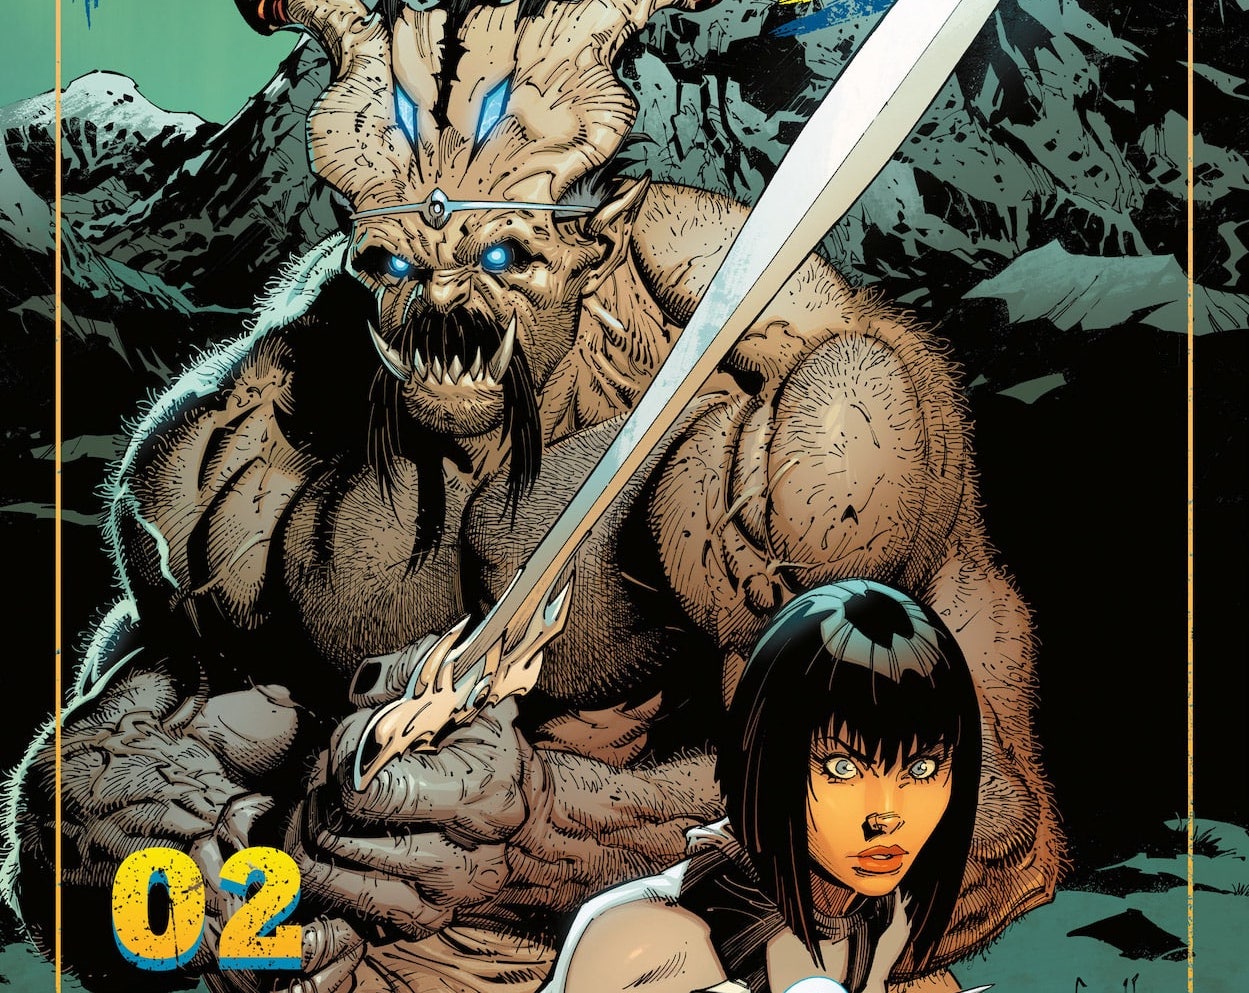 'We Have Demons' #2 builds out its intriguing world